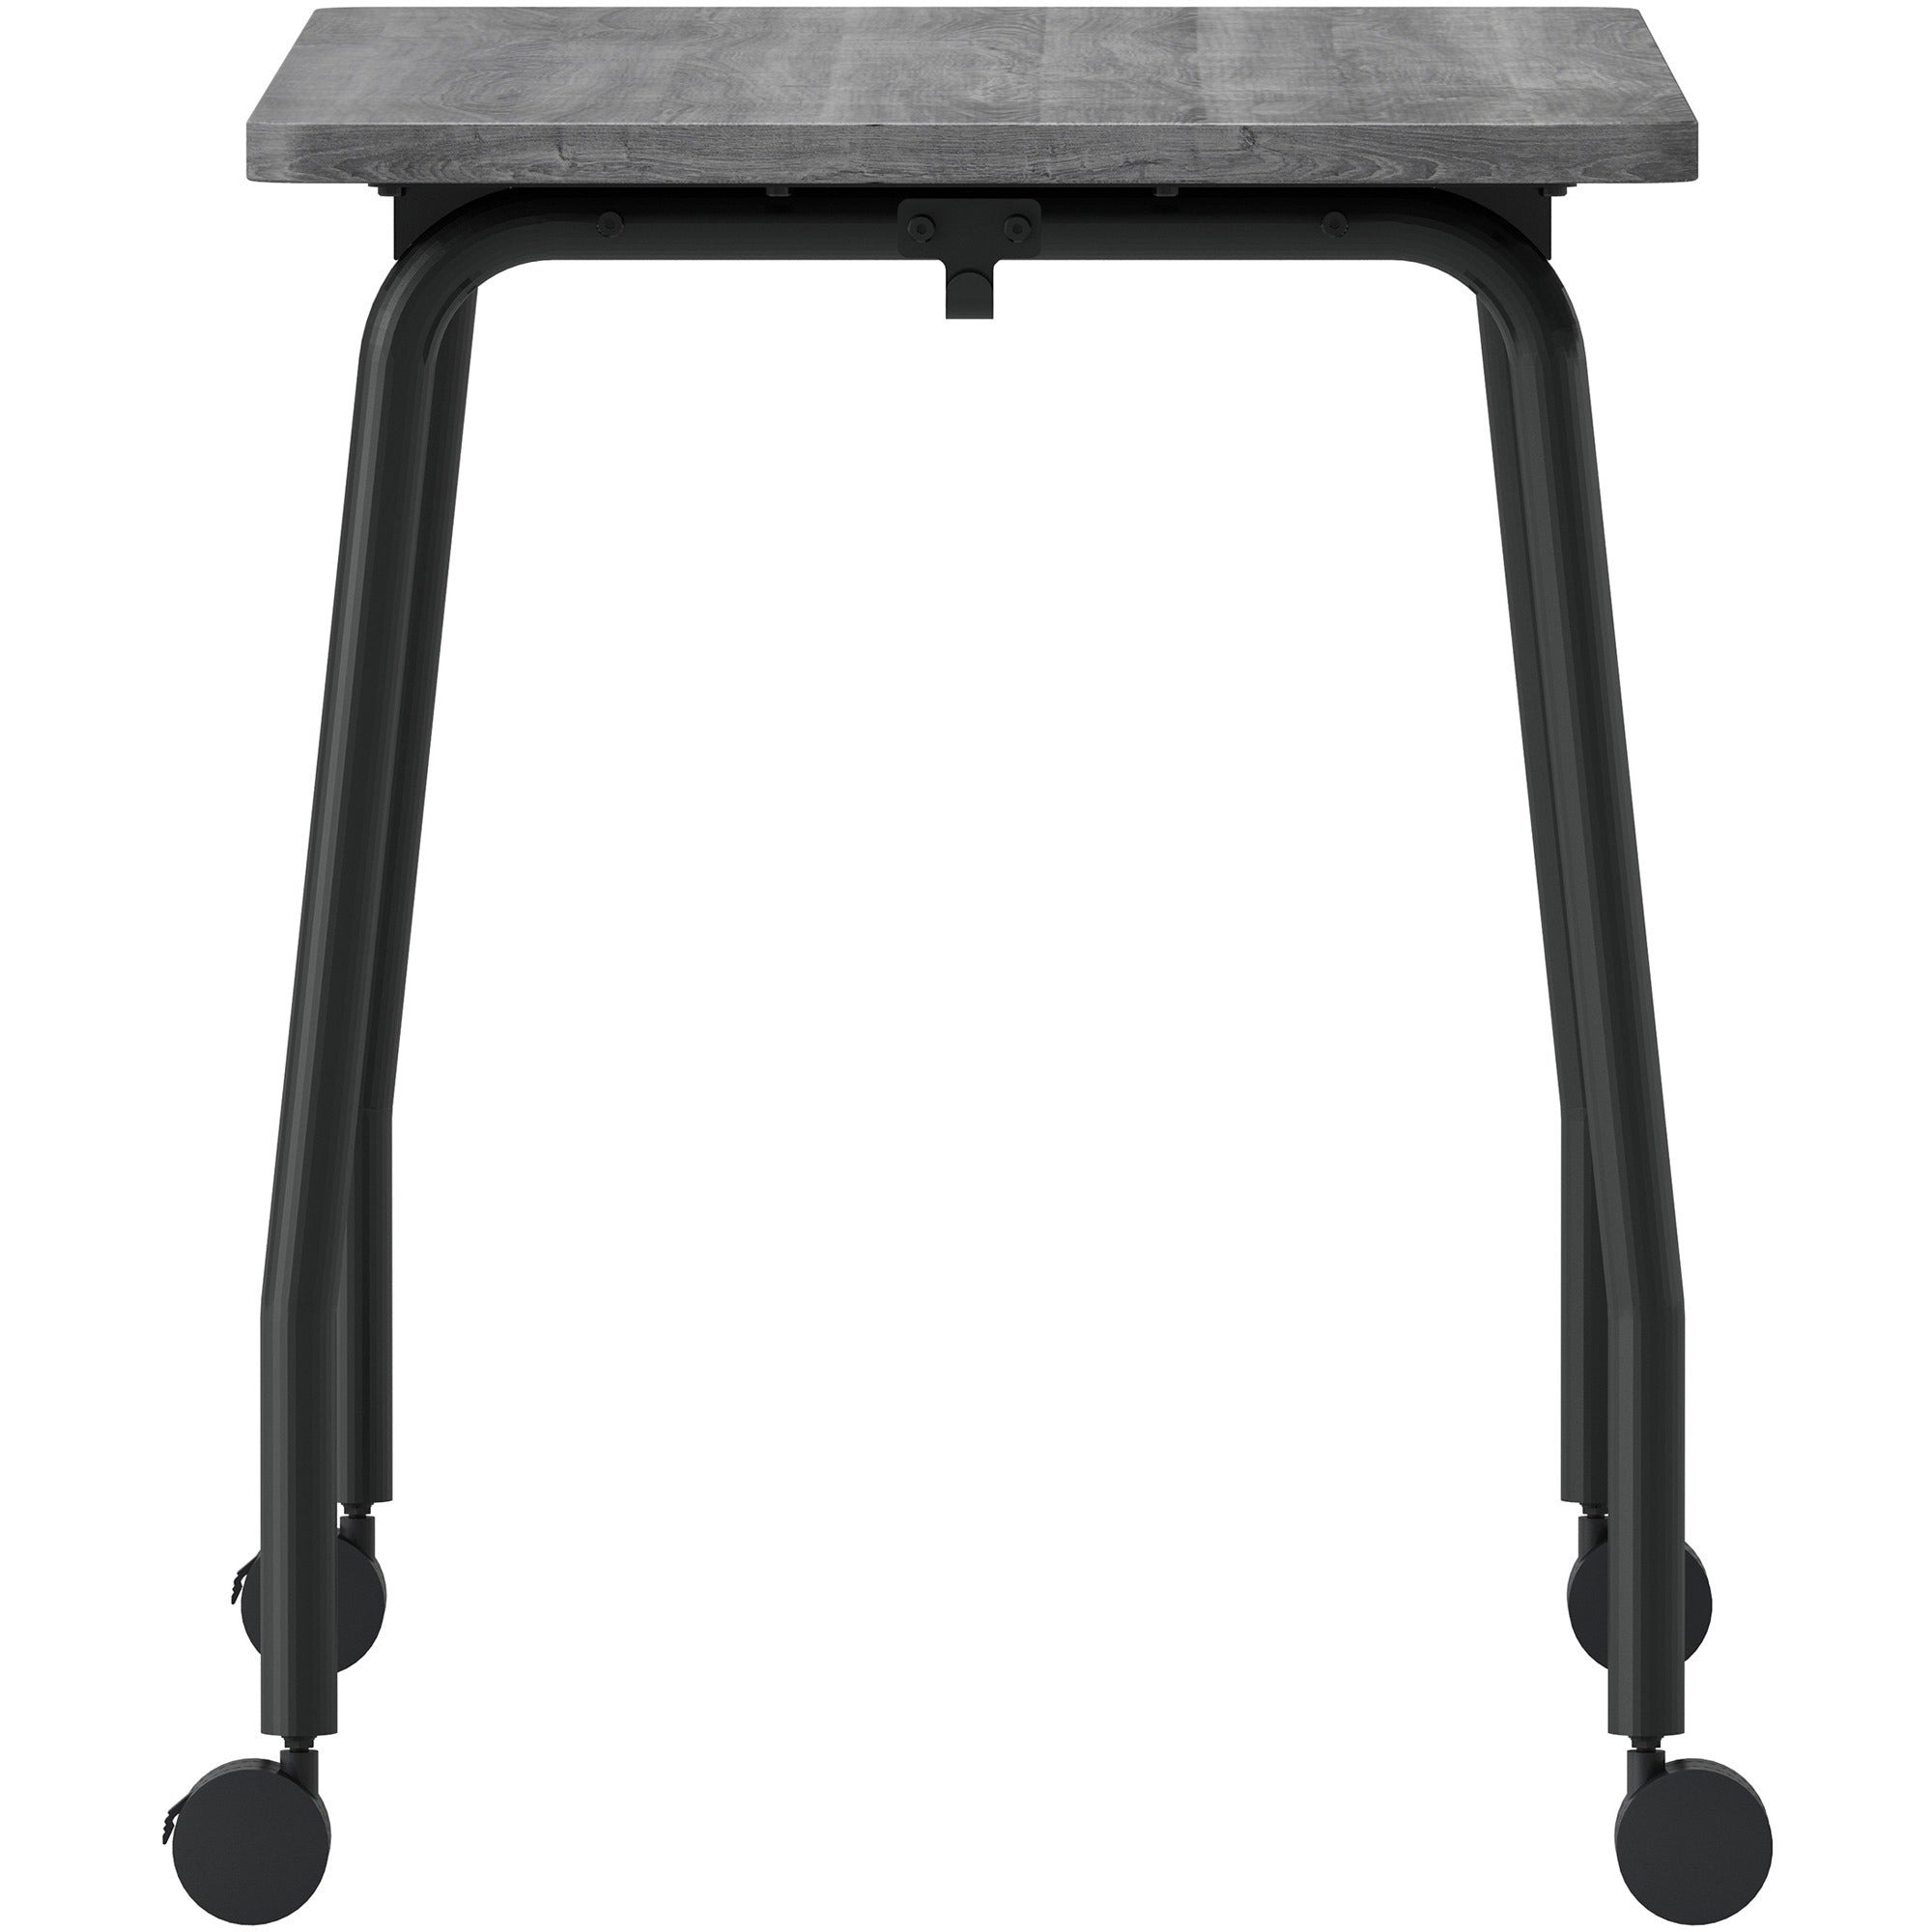 Lorell Training Table - For - Table TopLaminated Top - 300 lb Capacity - 29.50" Table Top Length x 23.63" Table Top Width x 1" Table Top Thickness - 47.25" Height - Assembly Required - Weathered Charcoal - Particleboard Top Material - 1 Each - 5